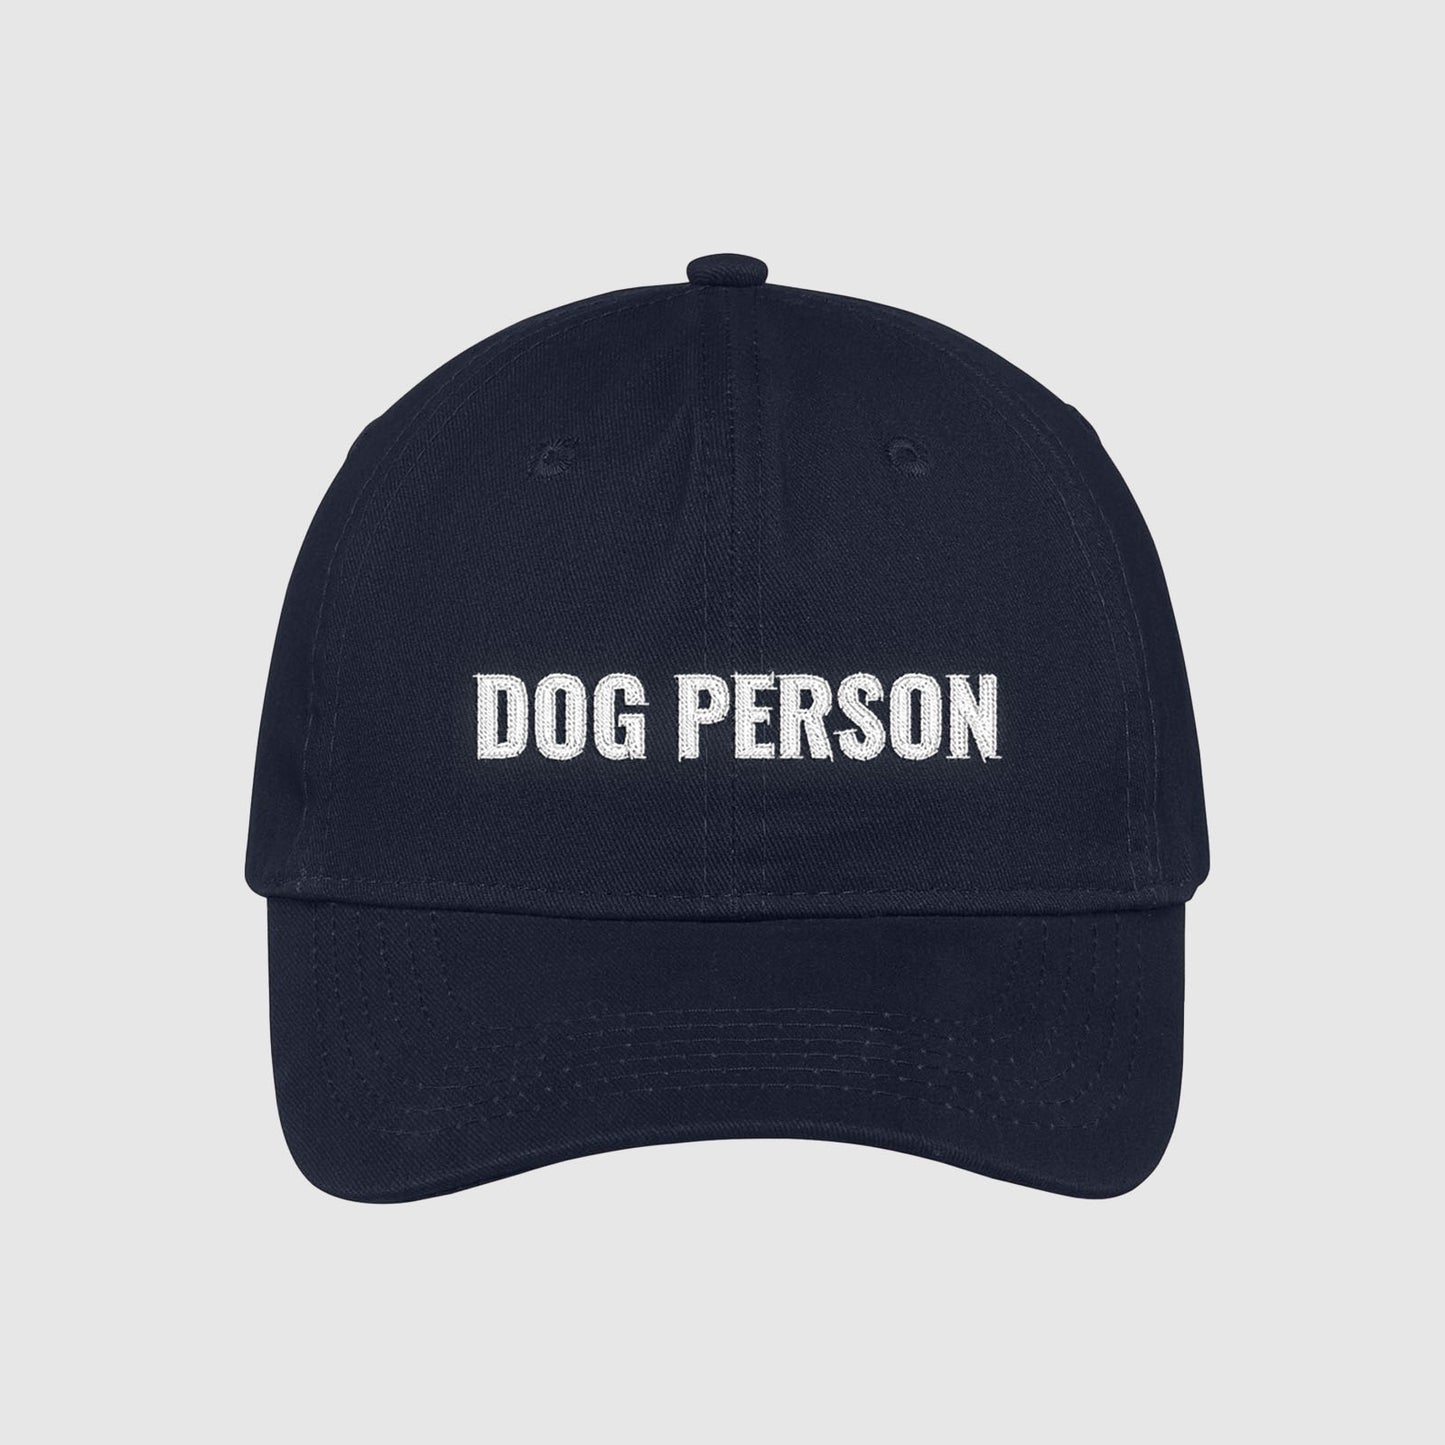 Navy dad hat with Dog Person embroidered on the front with white thread.